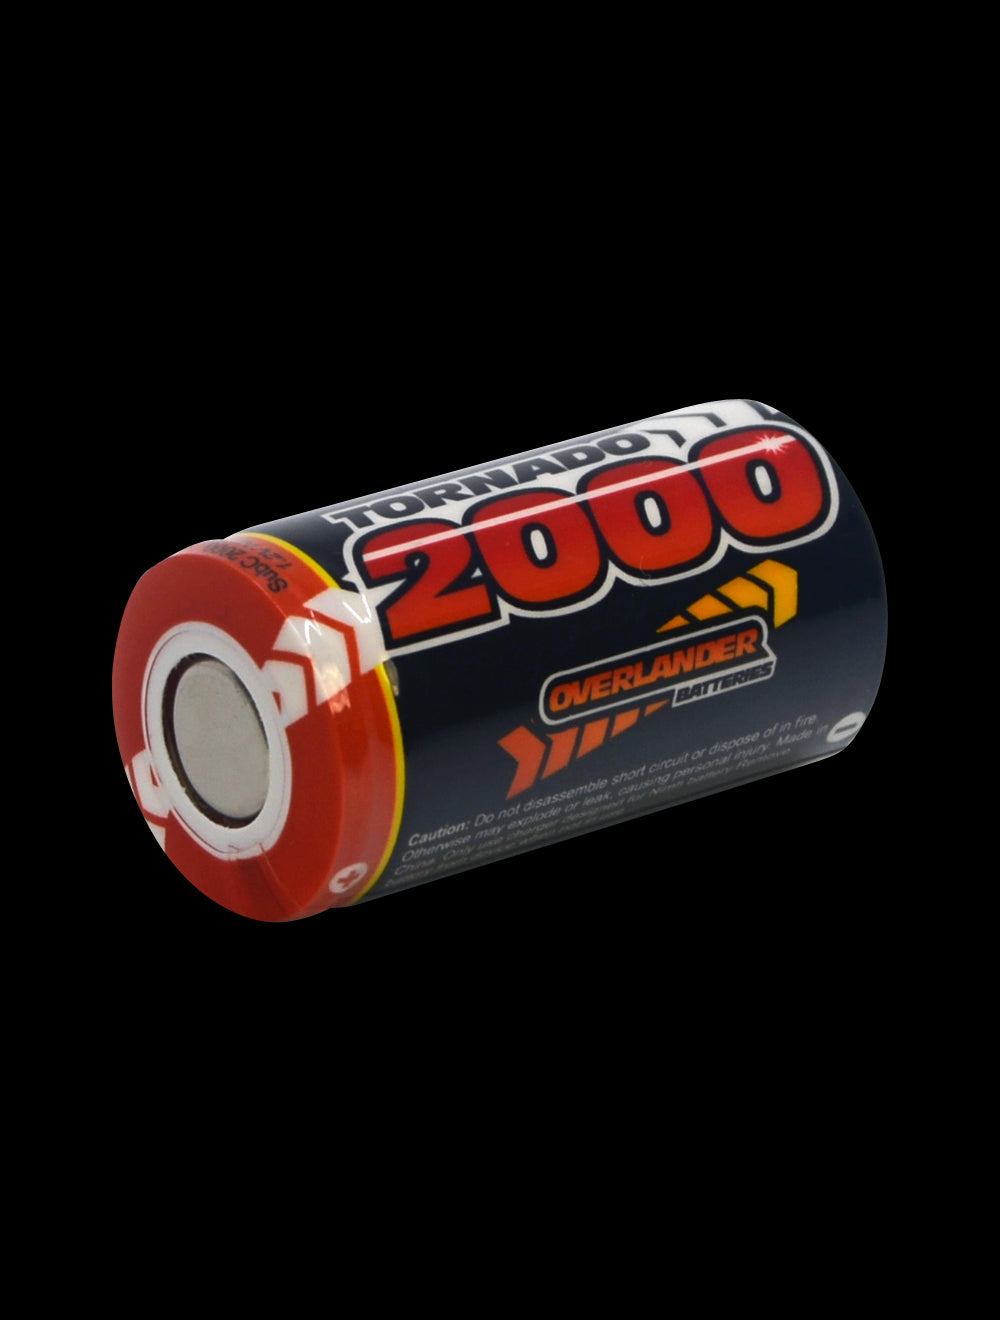 Overlander SubC 2000mAh 1.2V NiMH Cell - Tagged 2668